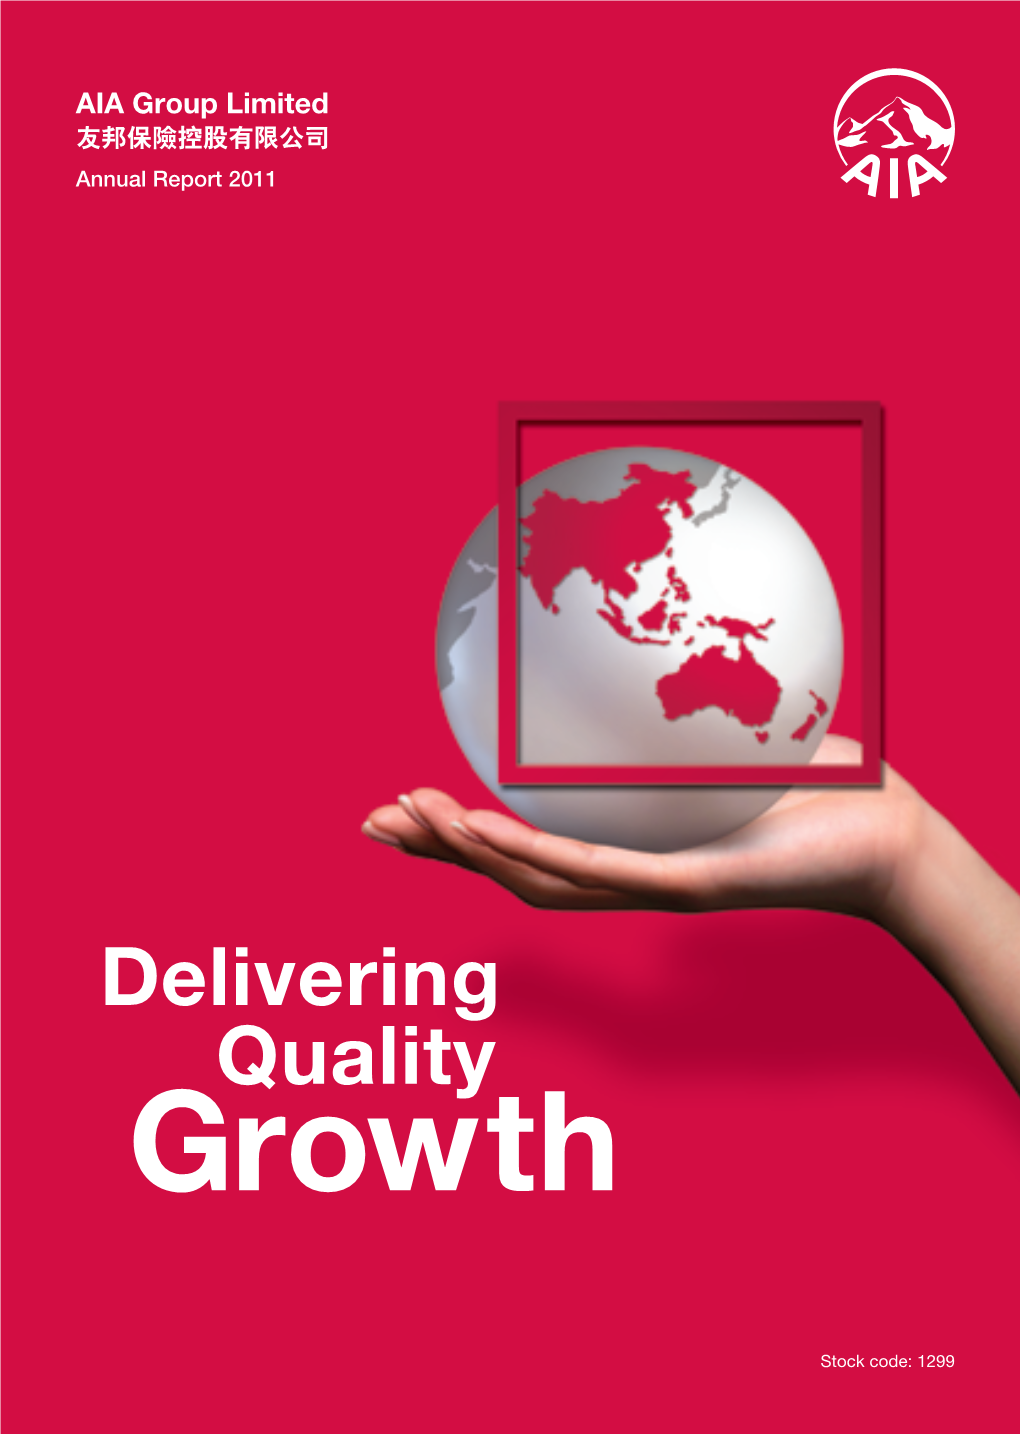 AIA Group Limited – Annual Report 2011 Delivering Quality Growth